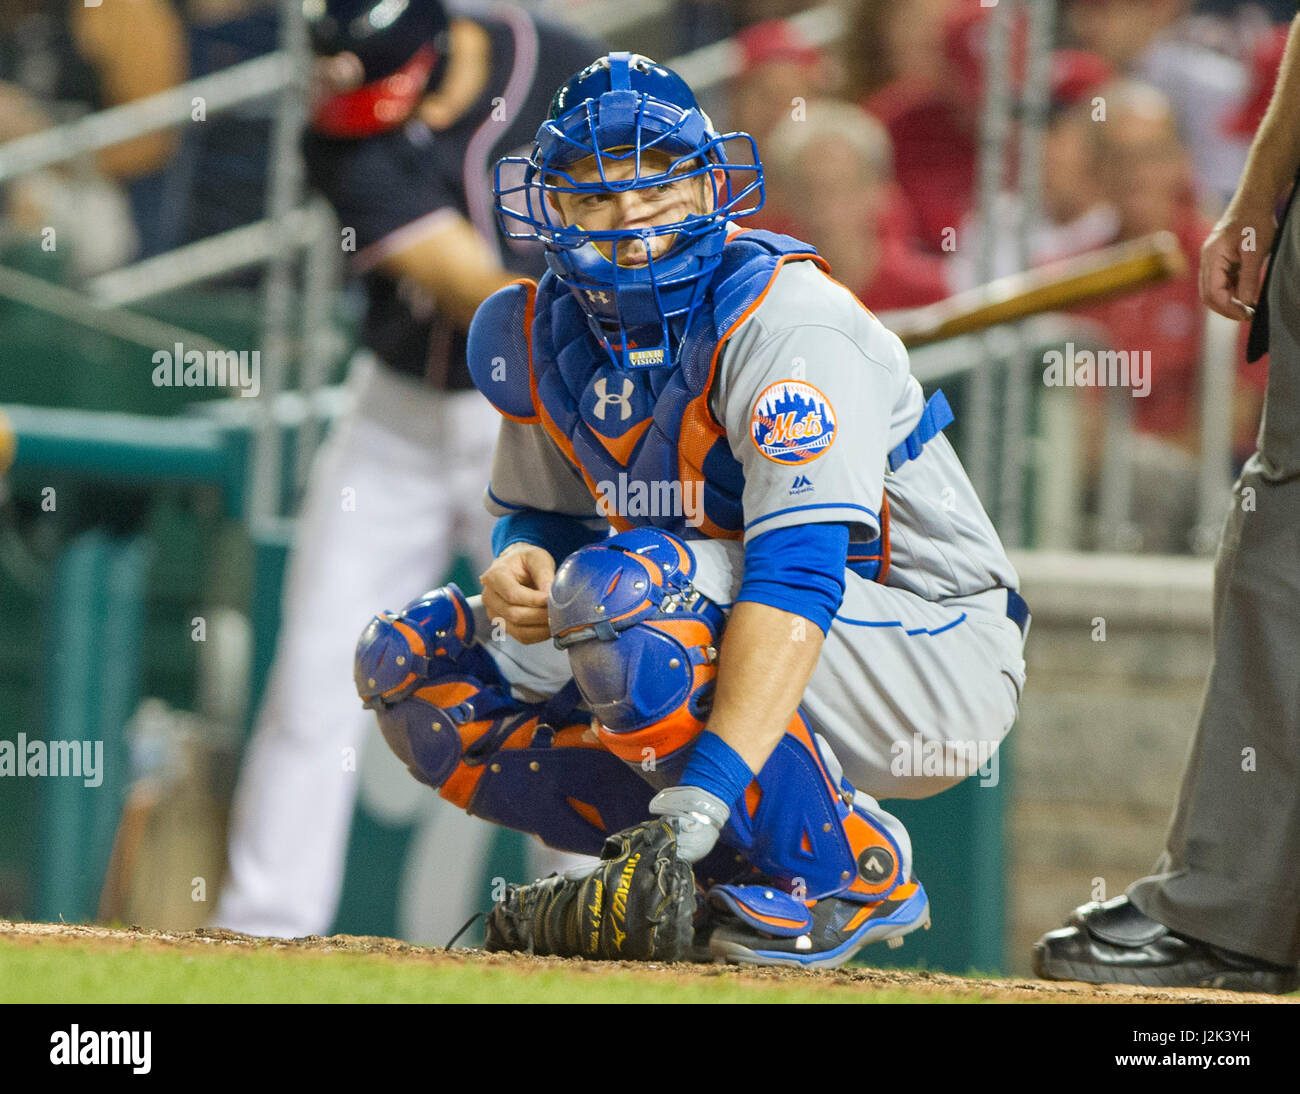 New York Mets catcher Travis d'Arnaud (18) looks towards the dugout for signs as the Washington Nationals bat in the fifth inning at Nationals Park in Washington, D.C. on Friday, April 28, 2017. Credit: Ron Sachs / CNP /MediaPunch Stock Photo